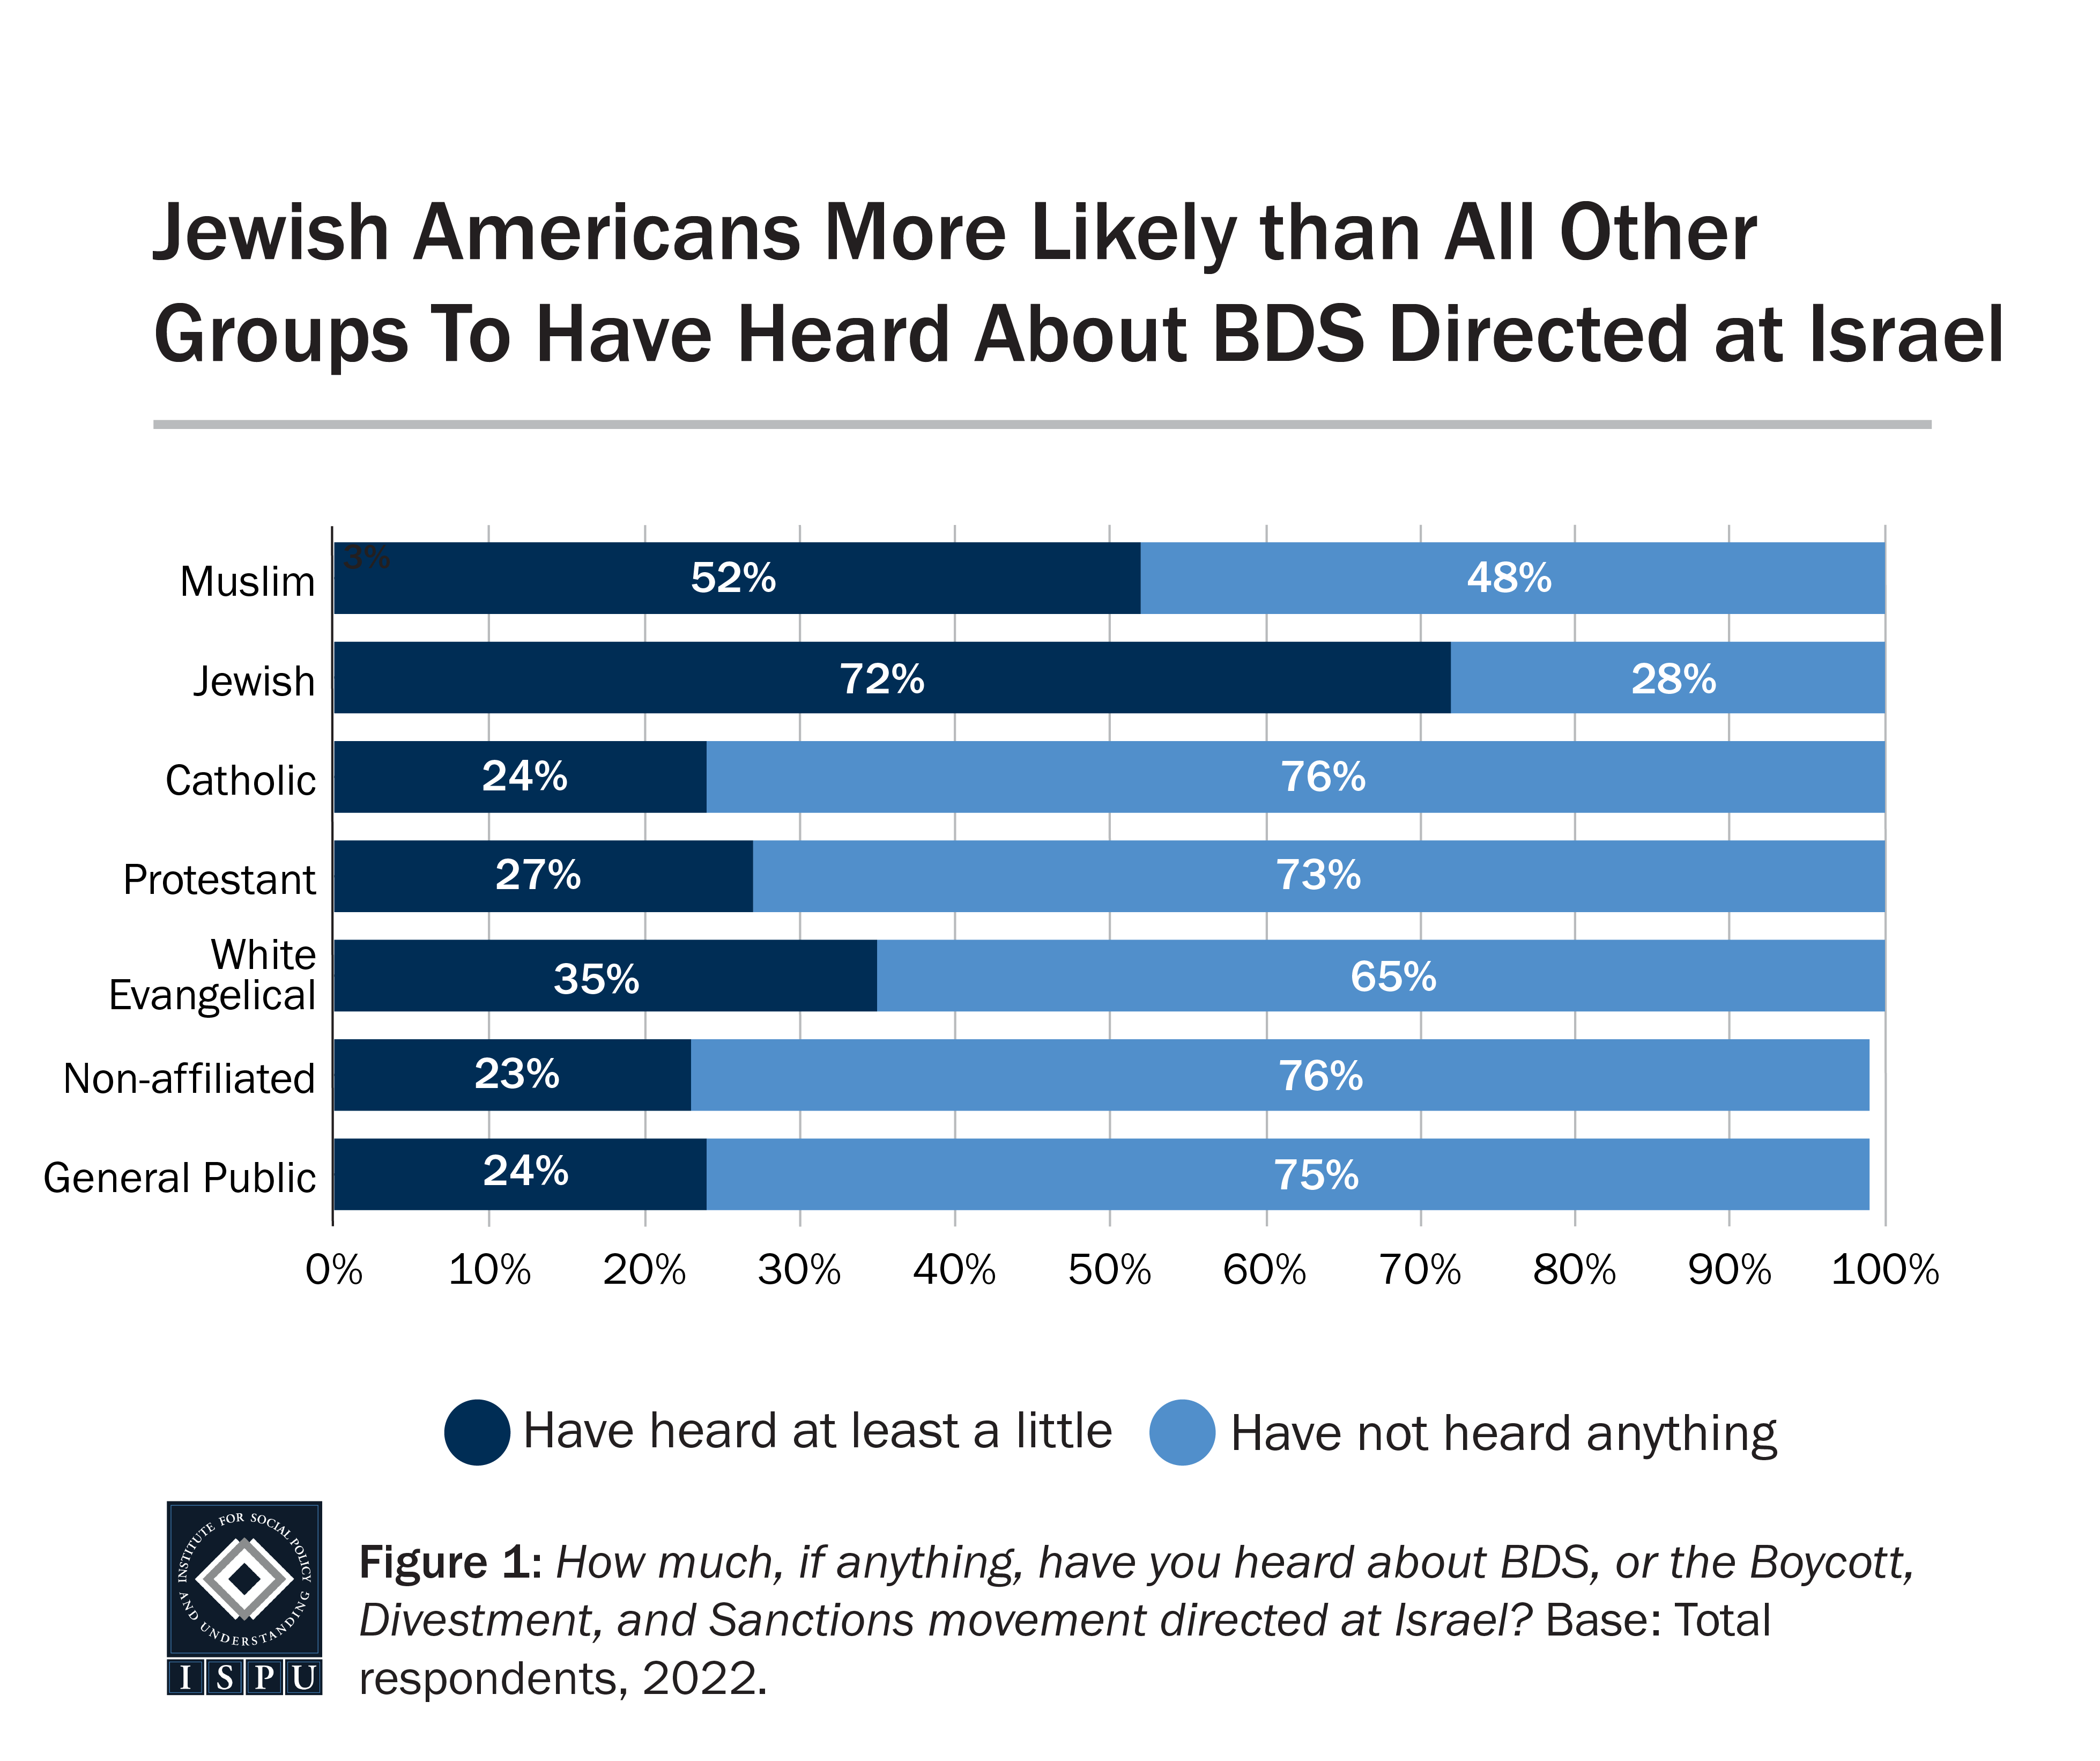 Graph displaying: A bar graph showing that Jewish Americans are more likely than American Muslims, Catholics, Protestants, white Evangelicals, the non-affiliated, and the general public to have heard about the boycott, divestment, and sanctions movement directed at Israel.